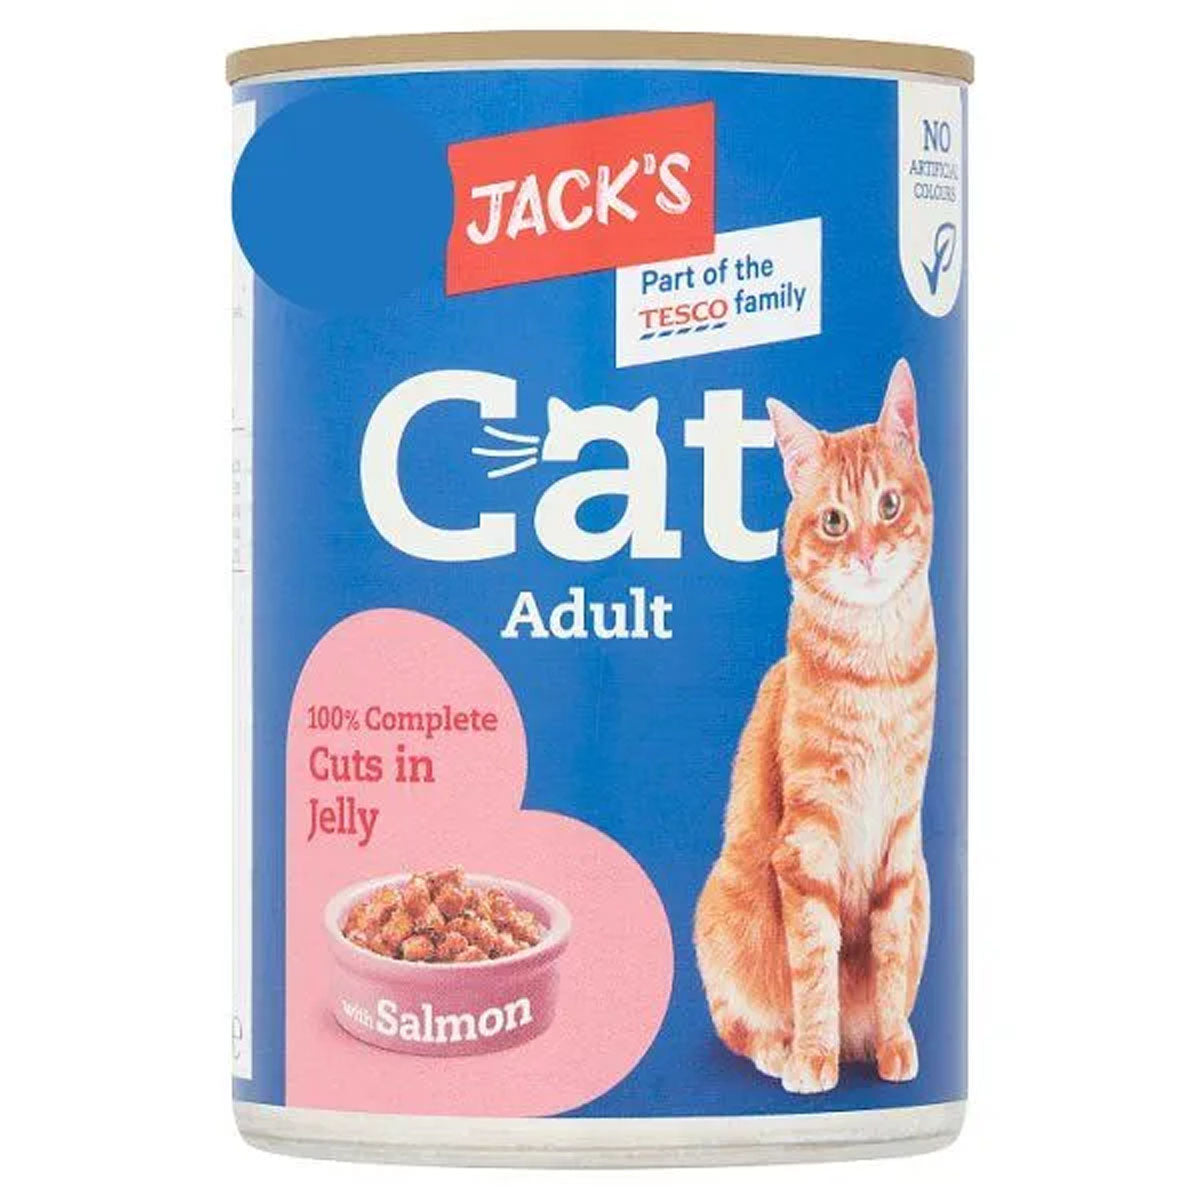 A can of Jacks - Cat Adult 100% Complete Cuts in Jelly with Salmon - 415g.